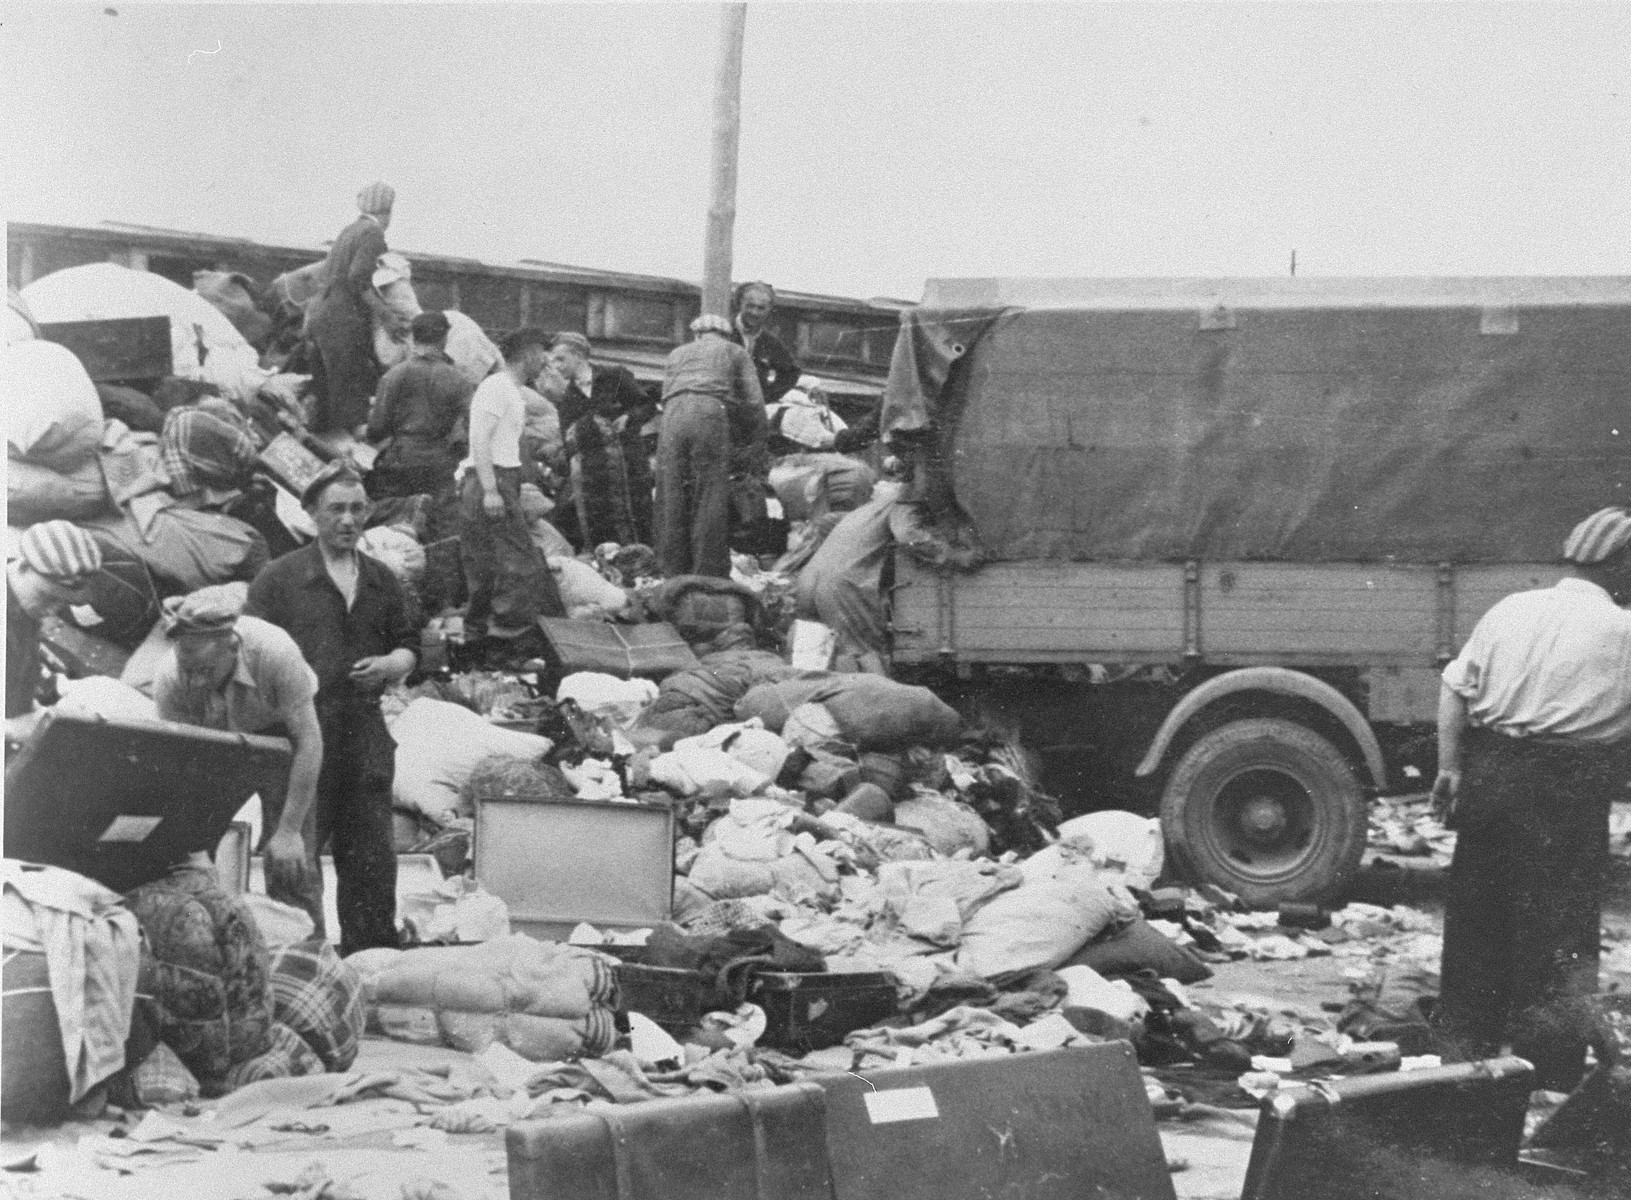 Prisoners in the Aufräumungskommando (order commandos) unload the confiscated property of a transport of Jews from Subcarpathian Rus at a warehouse in Auschwitz-Birkenau.

The camp prisoners came to refer to the looted property as "Kanada," associating it with the riches symbolized by Kanada.  The members of this commando were almost exclusively Jews.  "Kanada" storage facilities occupied several dozen barracks and other buildings around the camp.  The looted property was funneled from Auschwitz through an extensive distribution network that served many individuals and various economic branches of the Third Reich.